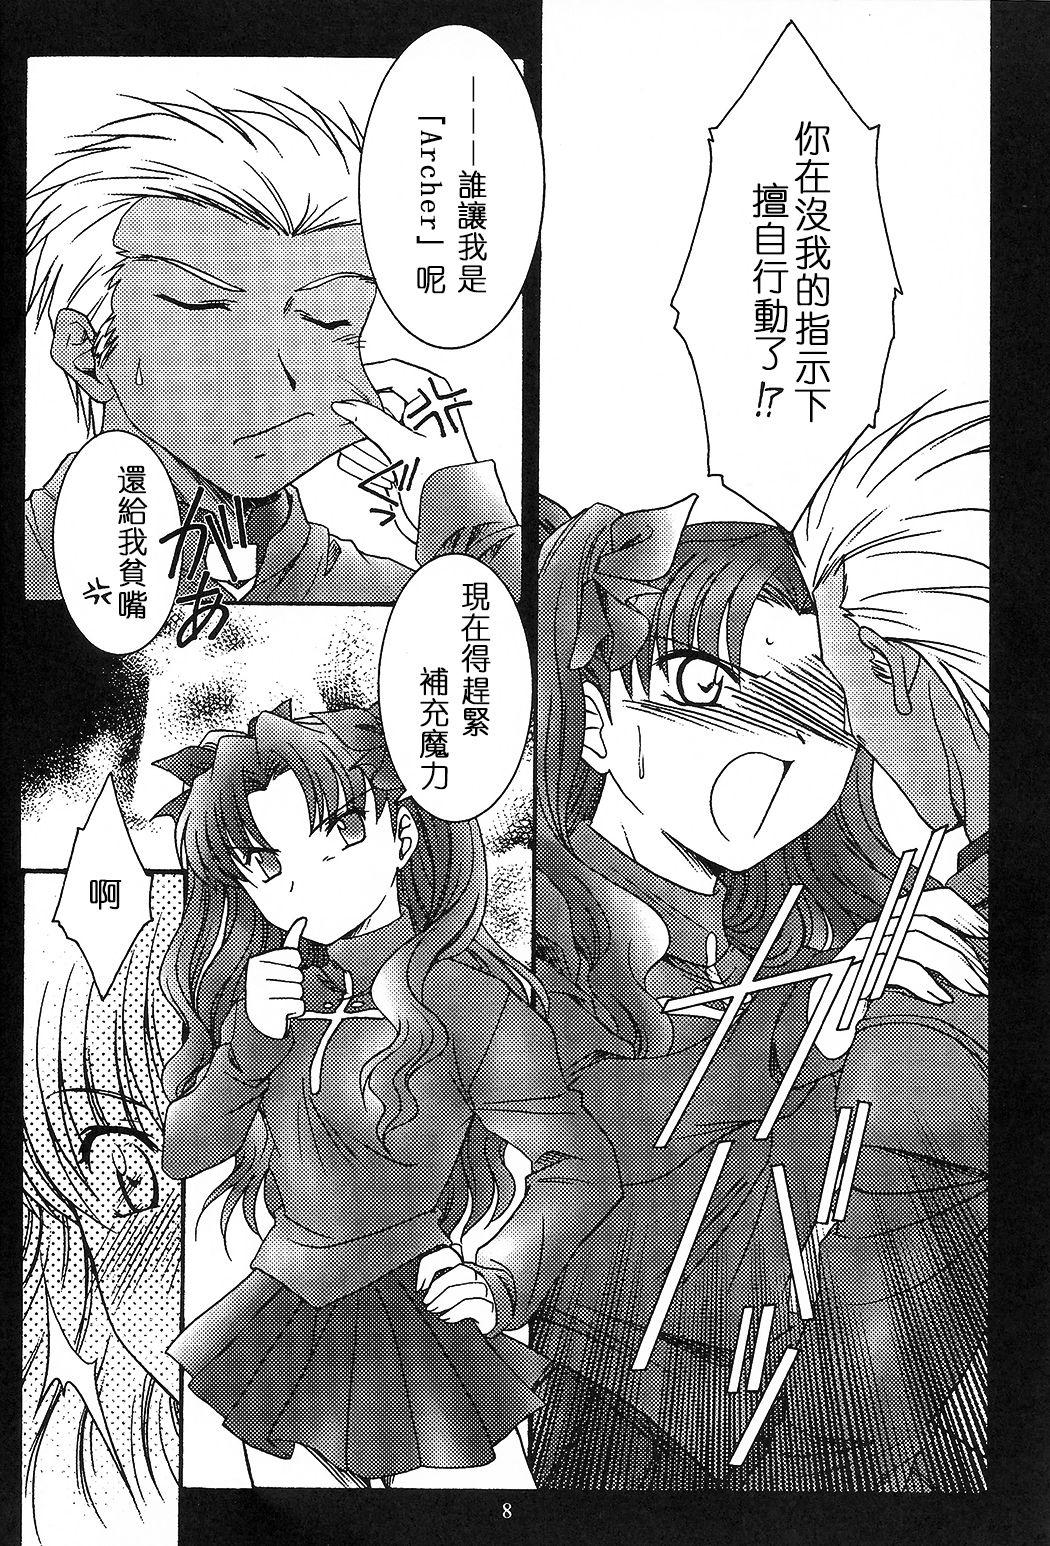 Outdoor Sex SECRET WINDOW - Fate stay night Ejaculation - Page 7